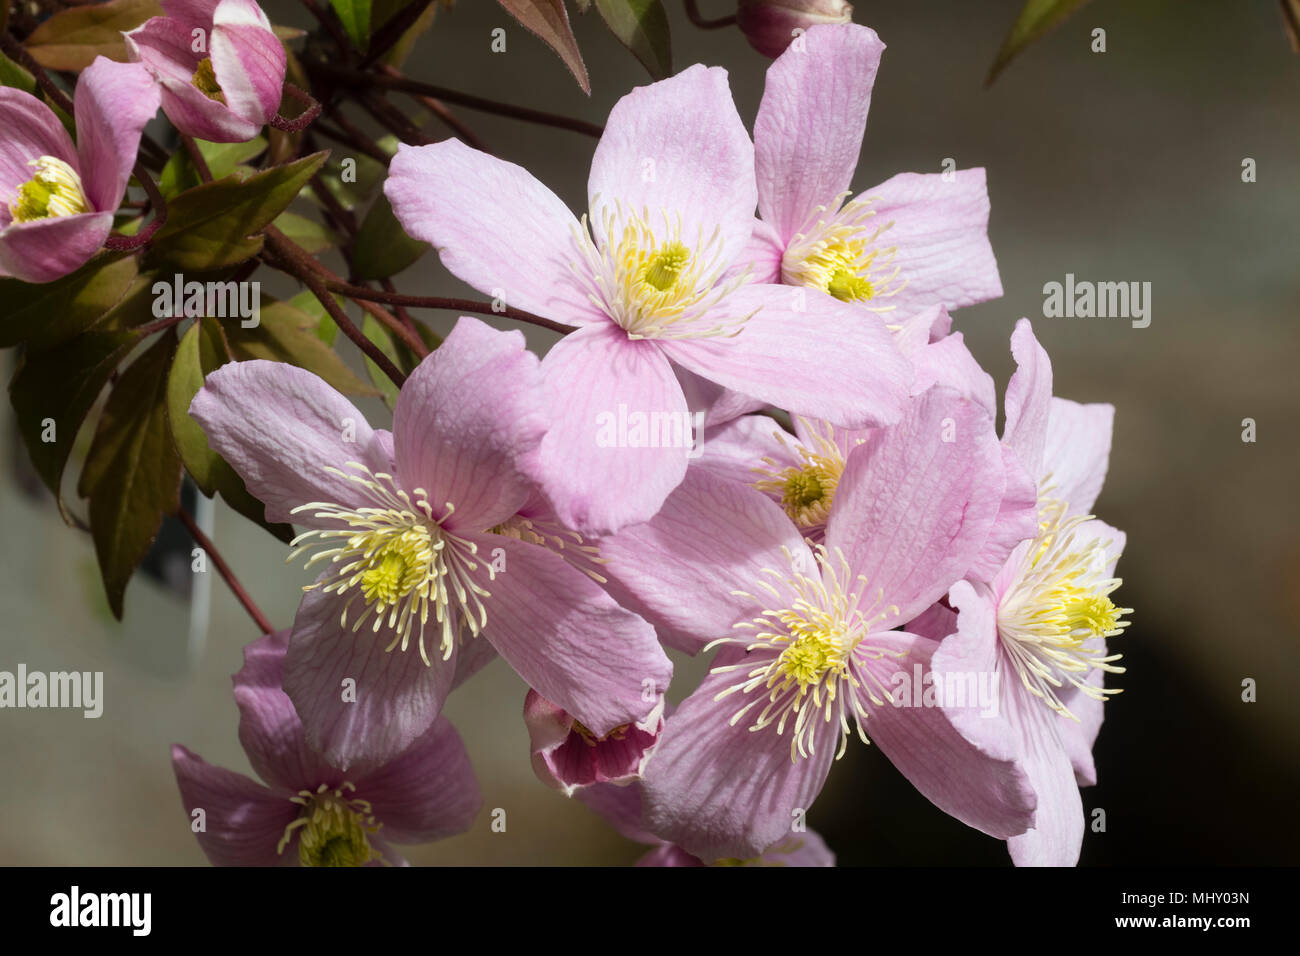 Pink flowers of the deciduous, late spring flowering climber, Clematis montana 'Elizabeth' Stock Photo